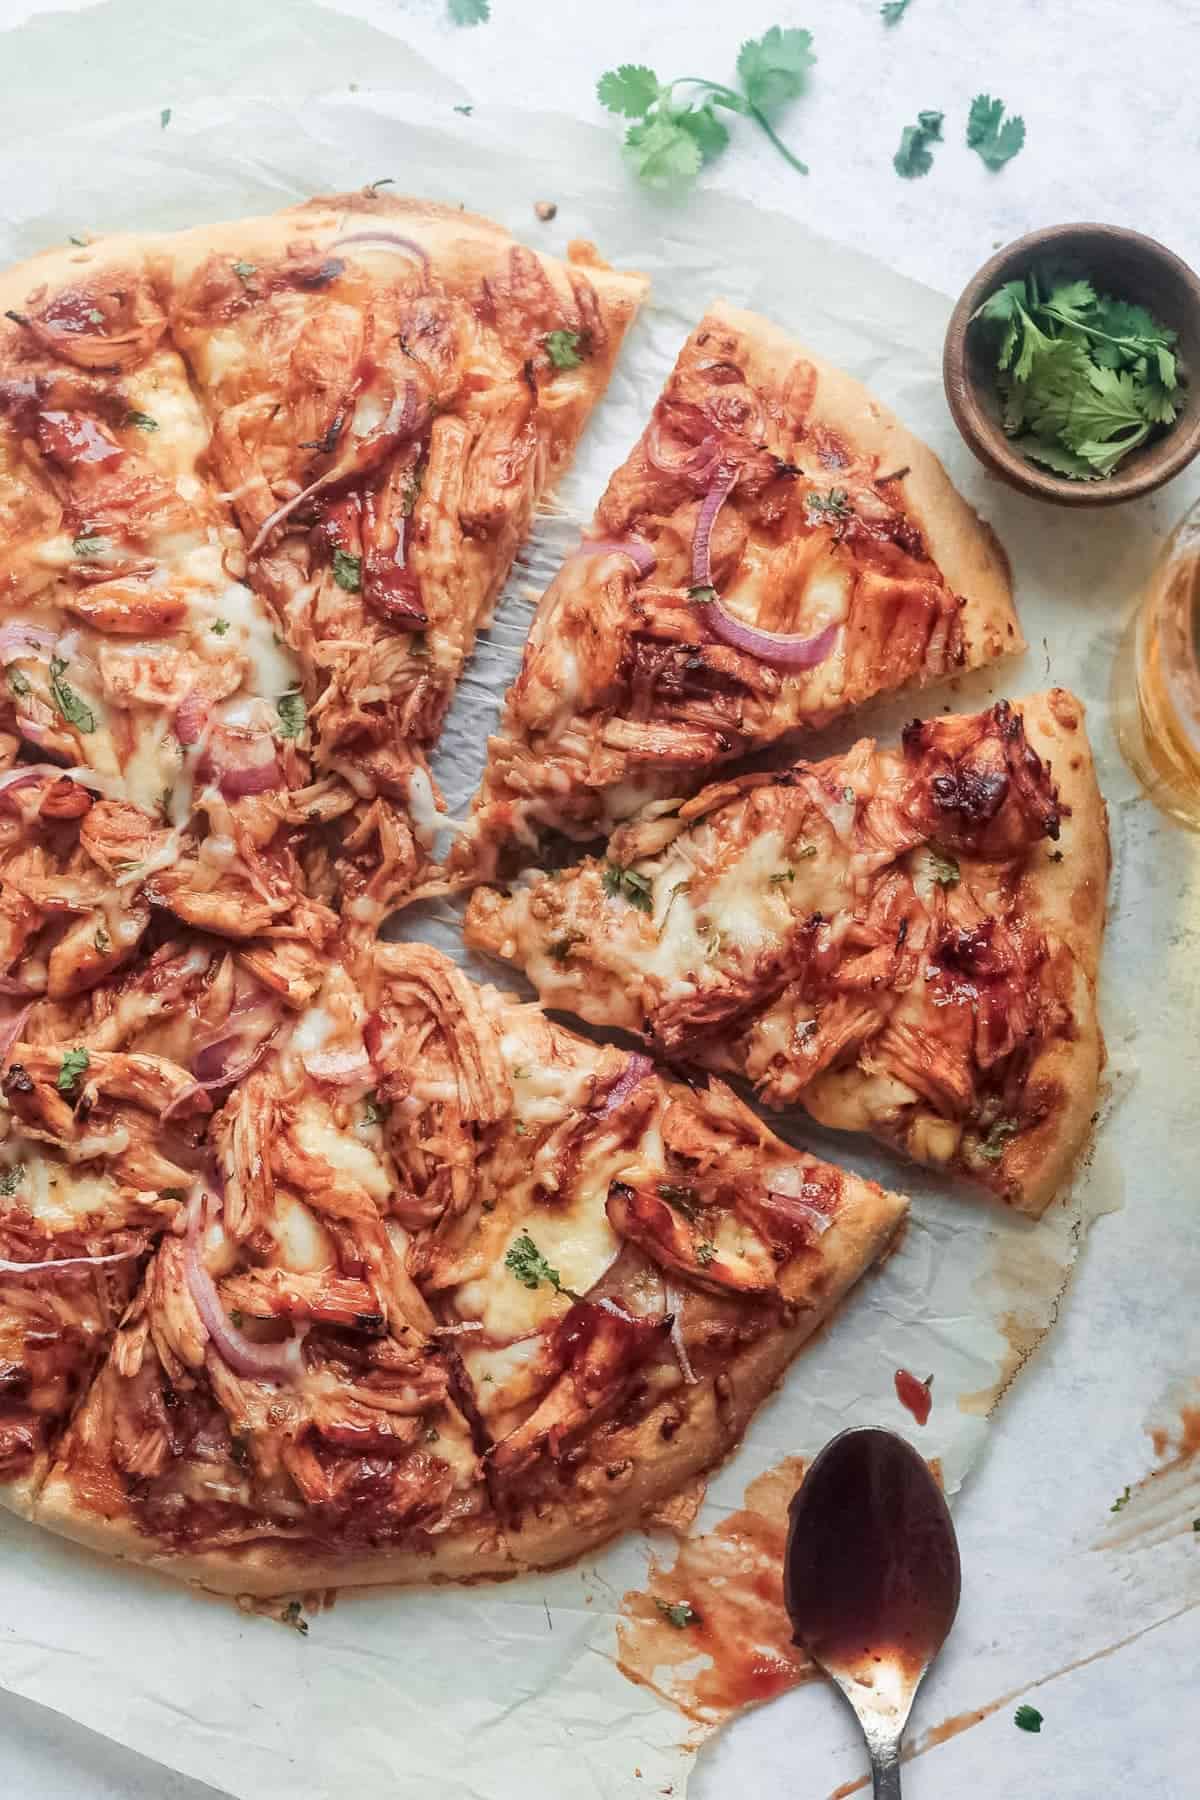 BBQ chicken pizza topped with fresh herbs